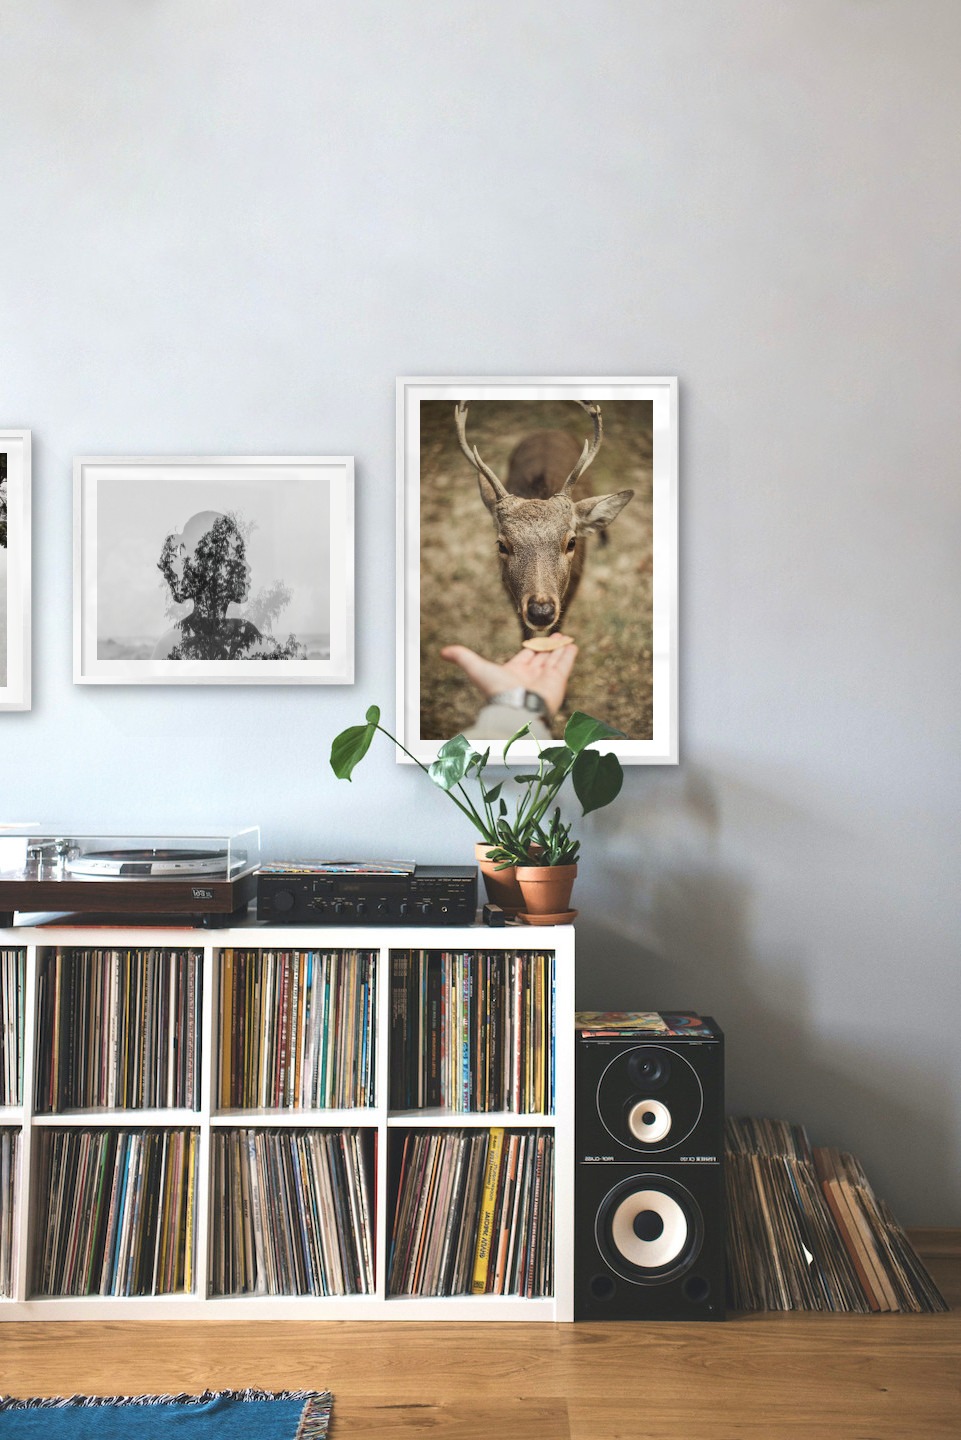 Gallery wall with picture frames in silver in sizes 40x50 and 50x70 with prints "Silhouette and tree", "Trees and silhouette" and "Feed a deer"